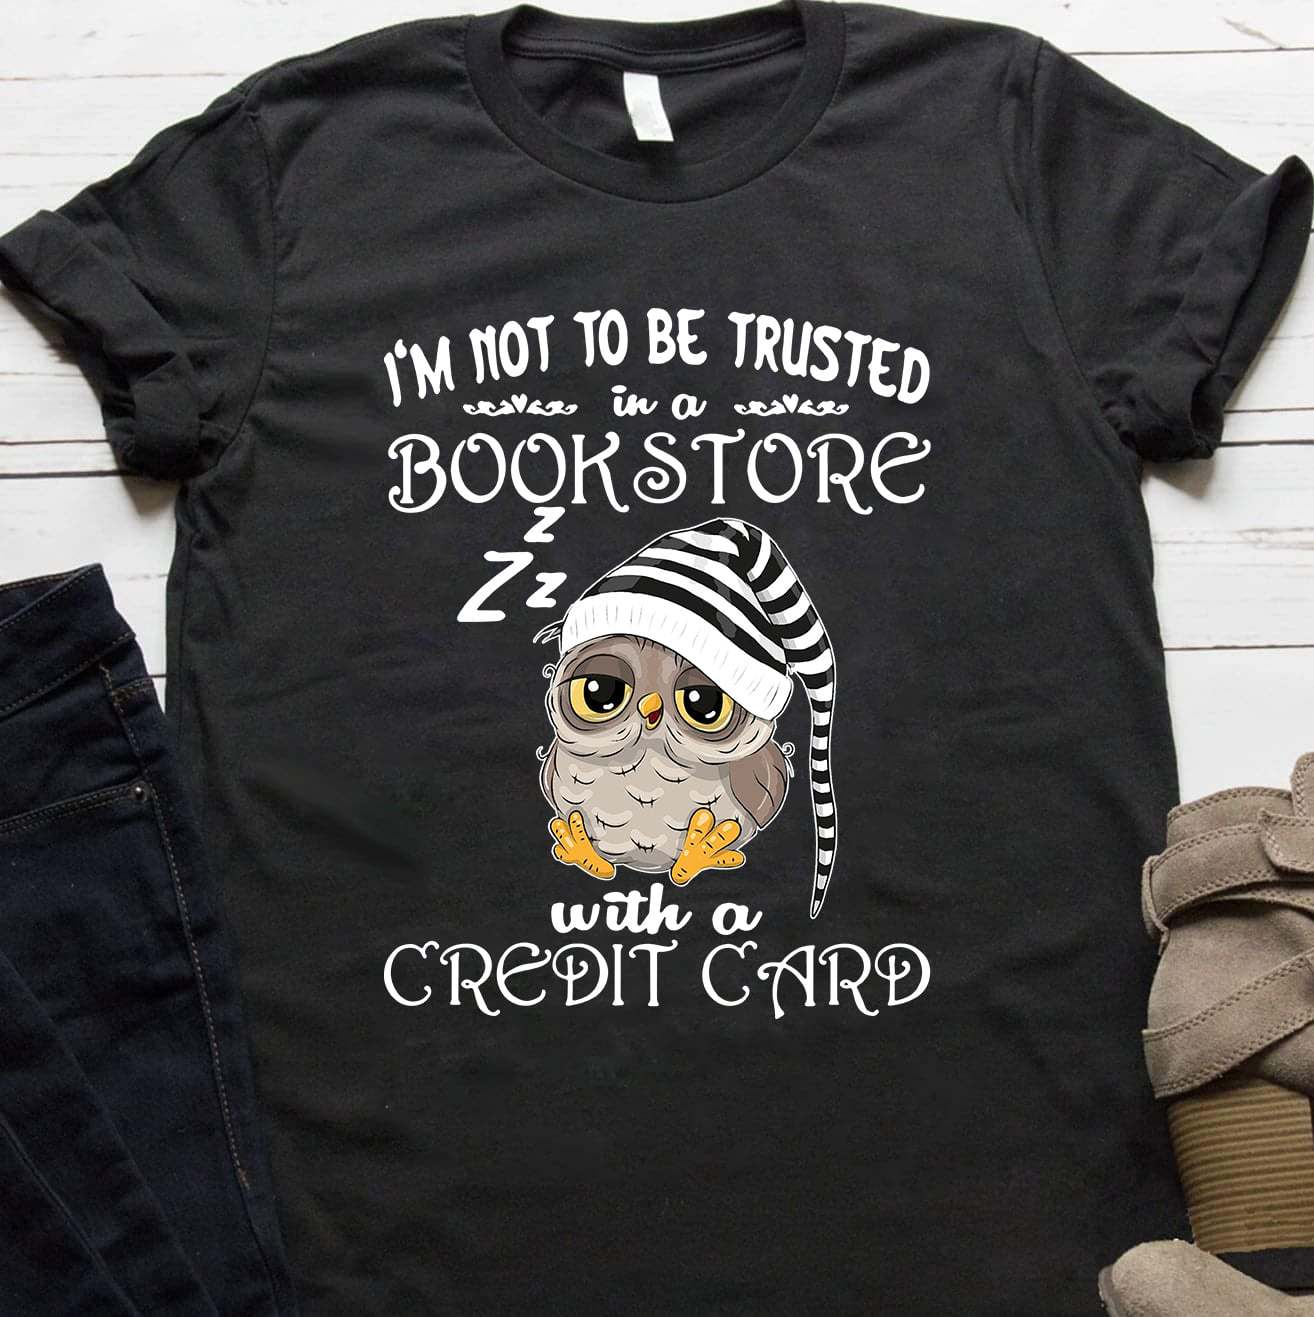 I'm not to be trusted in a bookstore with a credit card - Sleepy owl